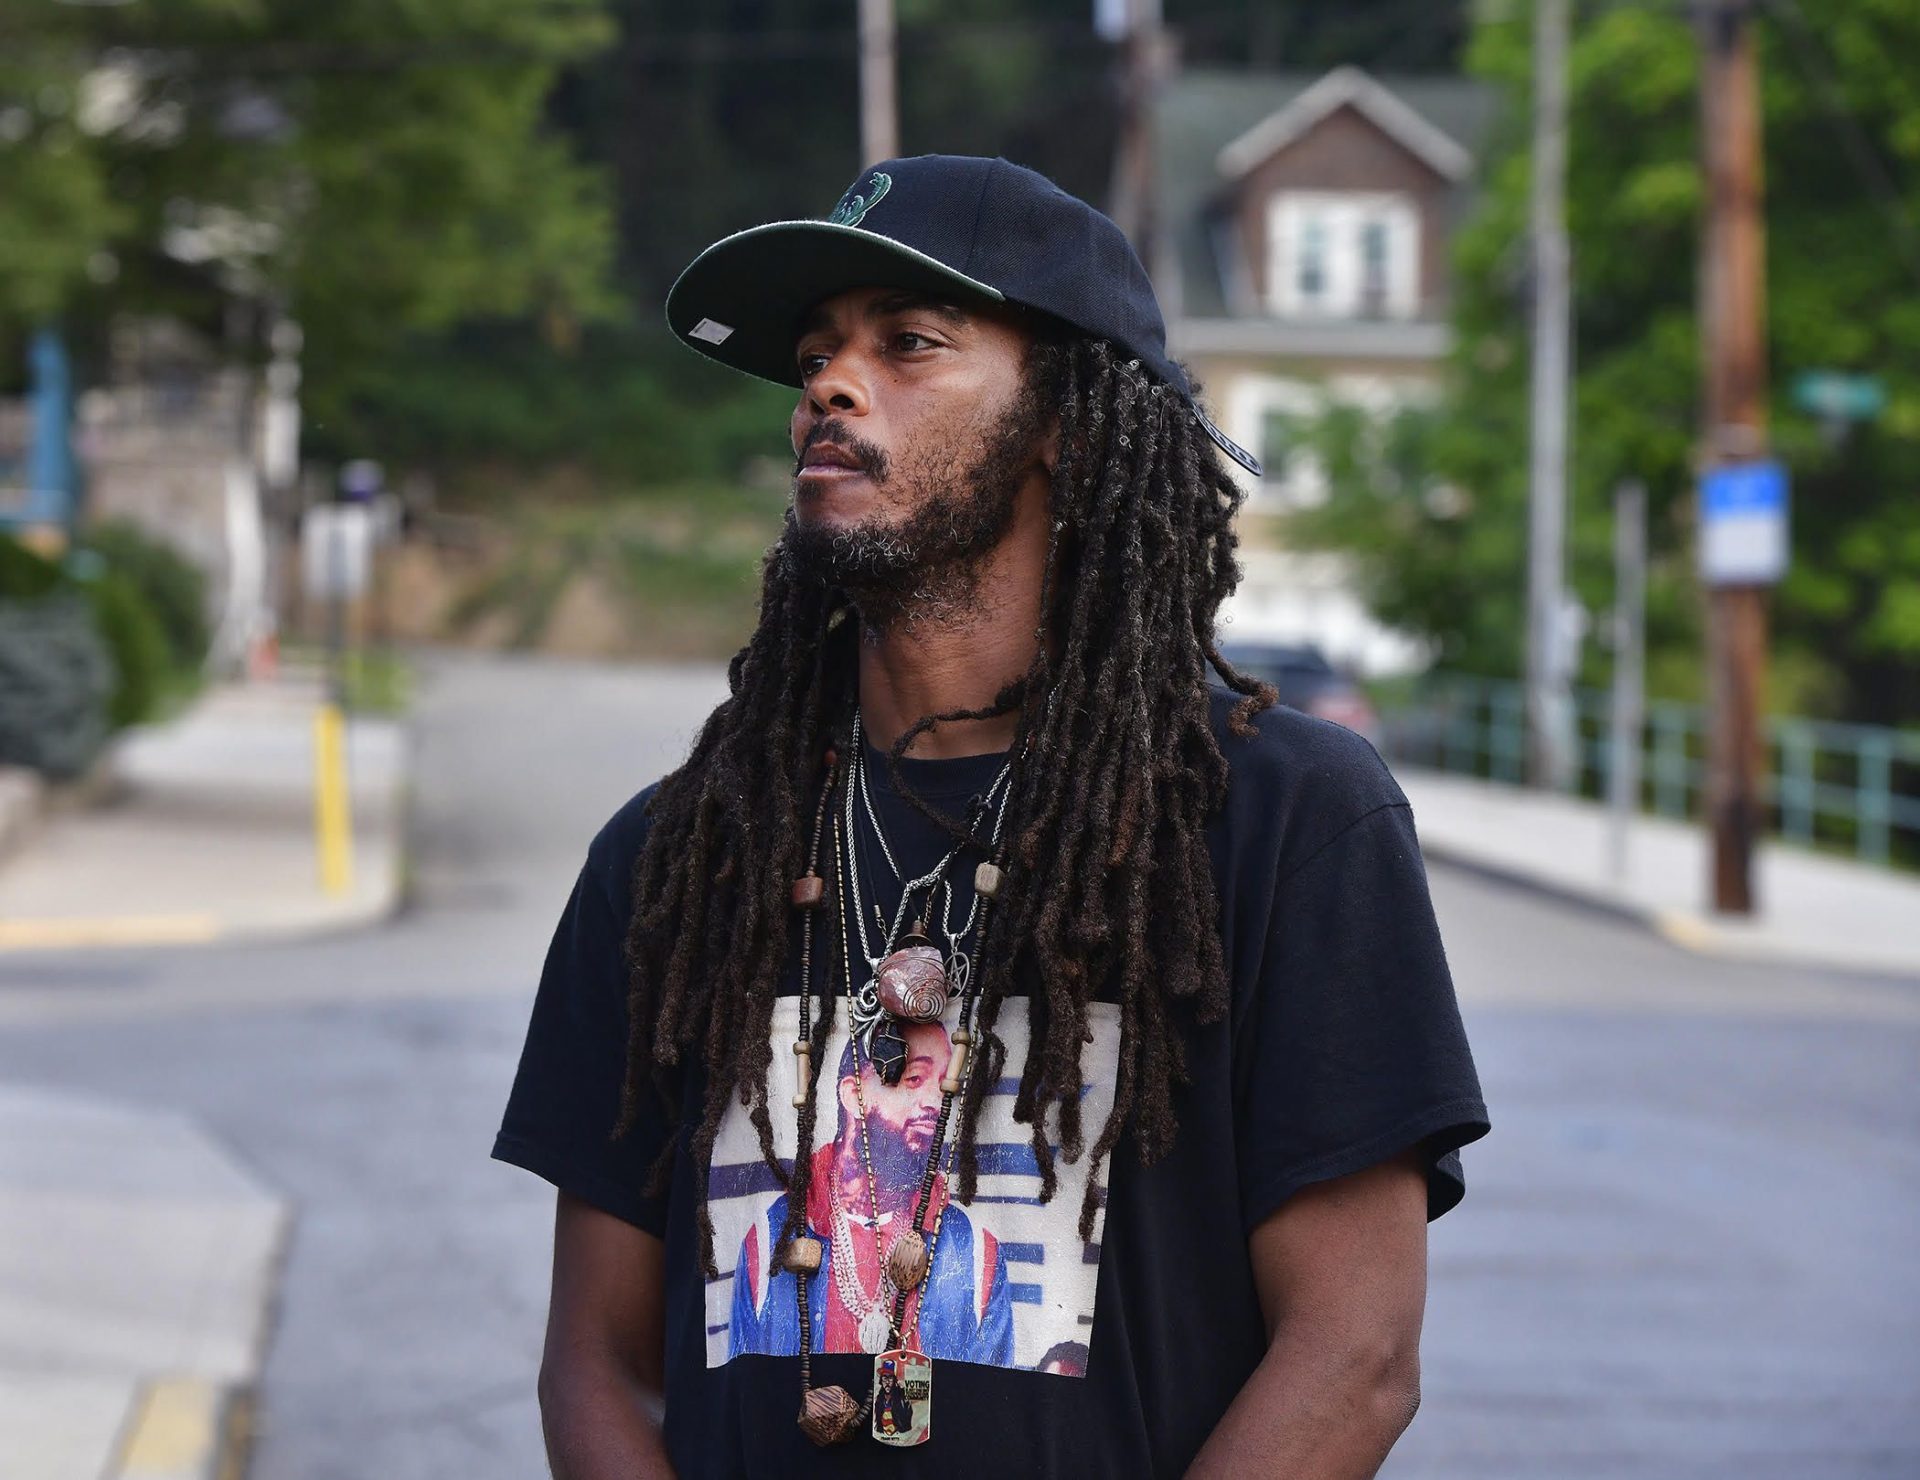 Frank Nitty, who helped lead Black Lives Matter activists on their pilgrimage from Milwaukee to Washington D.C. in August, on the day after Orsino V. Thurman was shot in the face by Terry Myers.